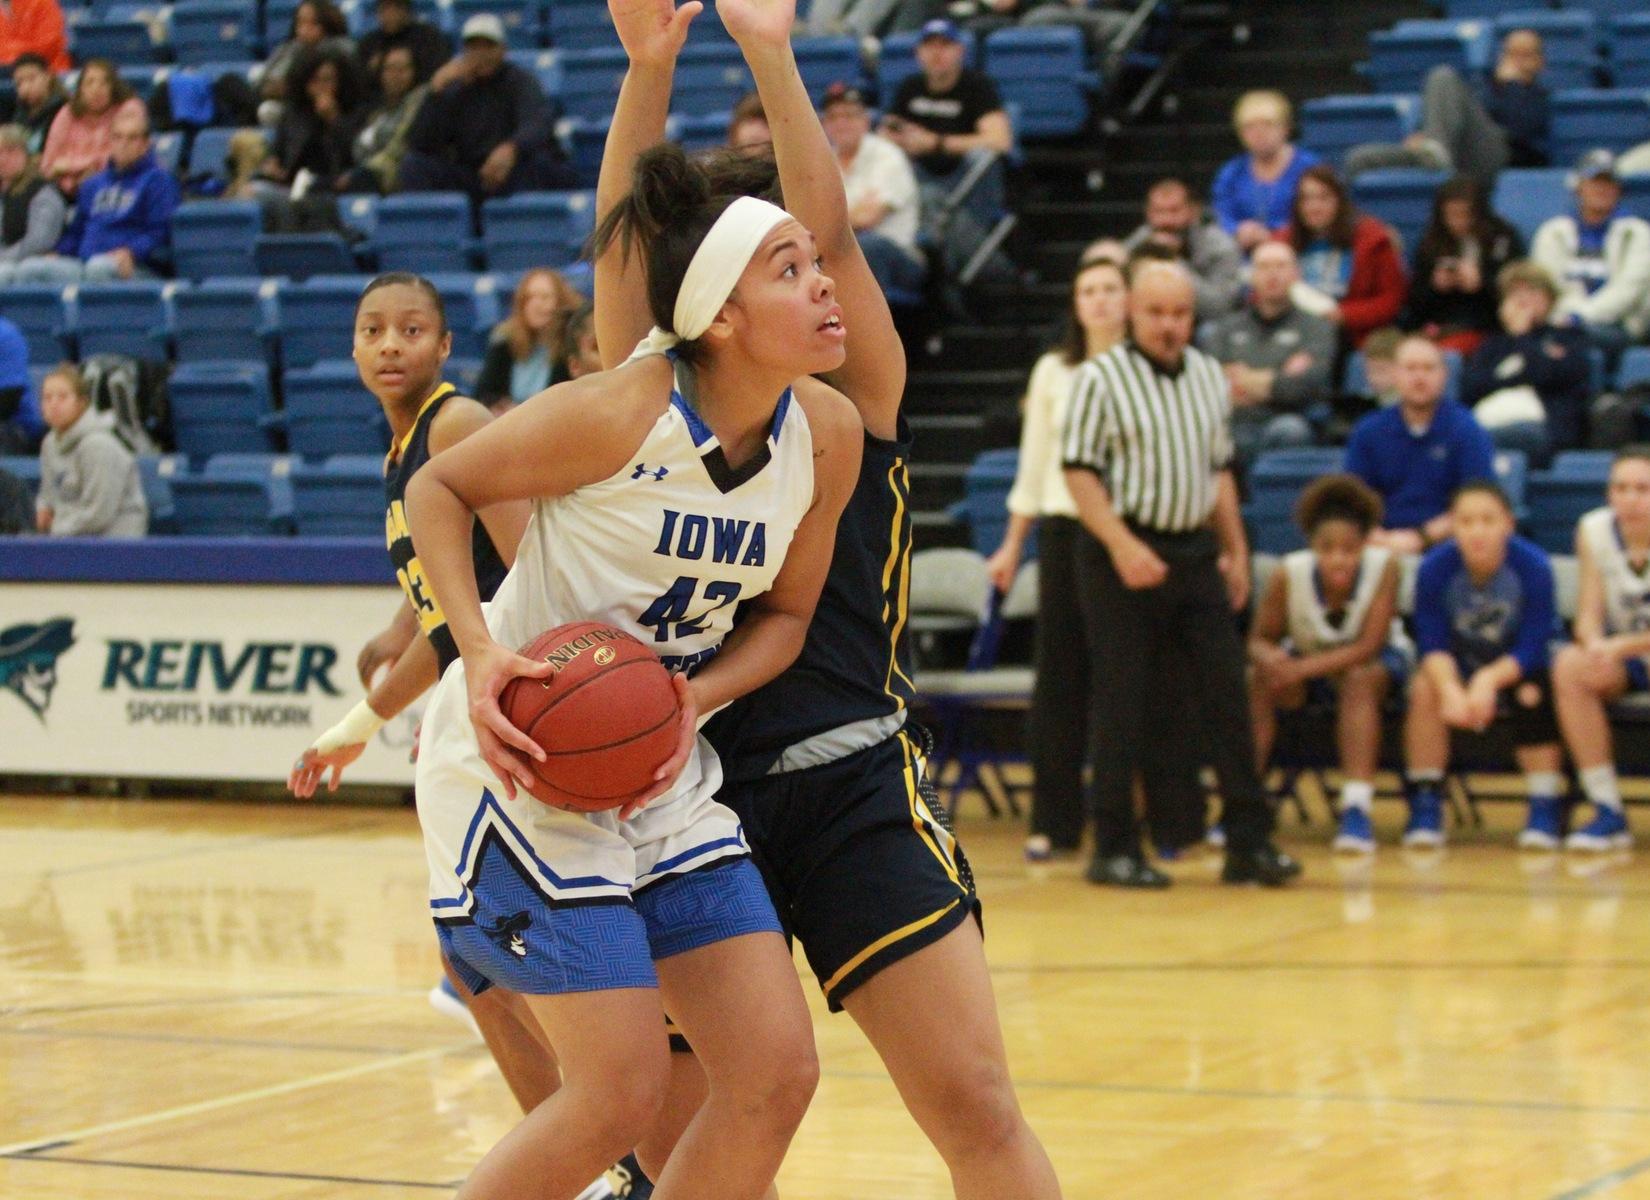 Freshman Kiara Dallmann chipped 12 points on 5 of 7 shooting and six rebounds in the win over Ellsworth Community College.